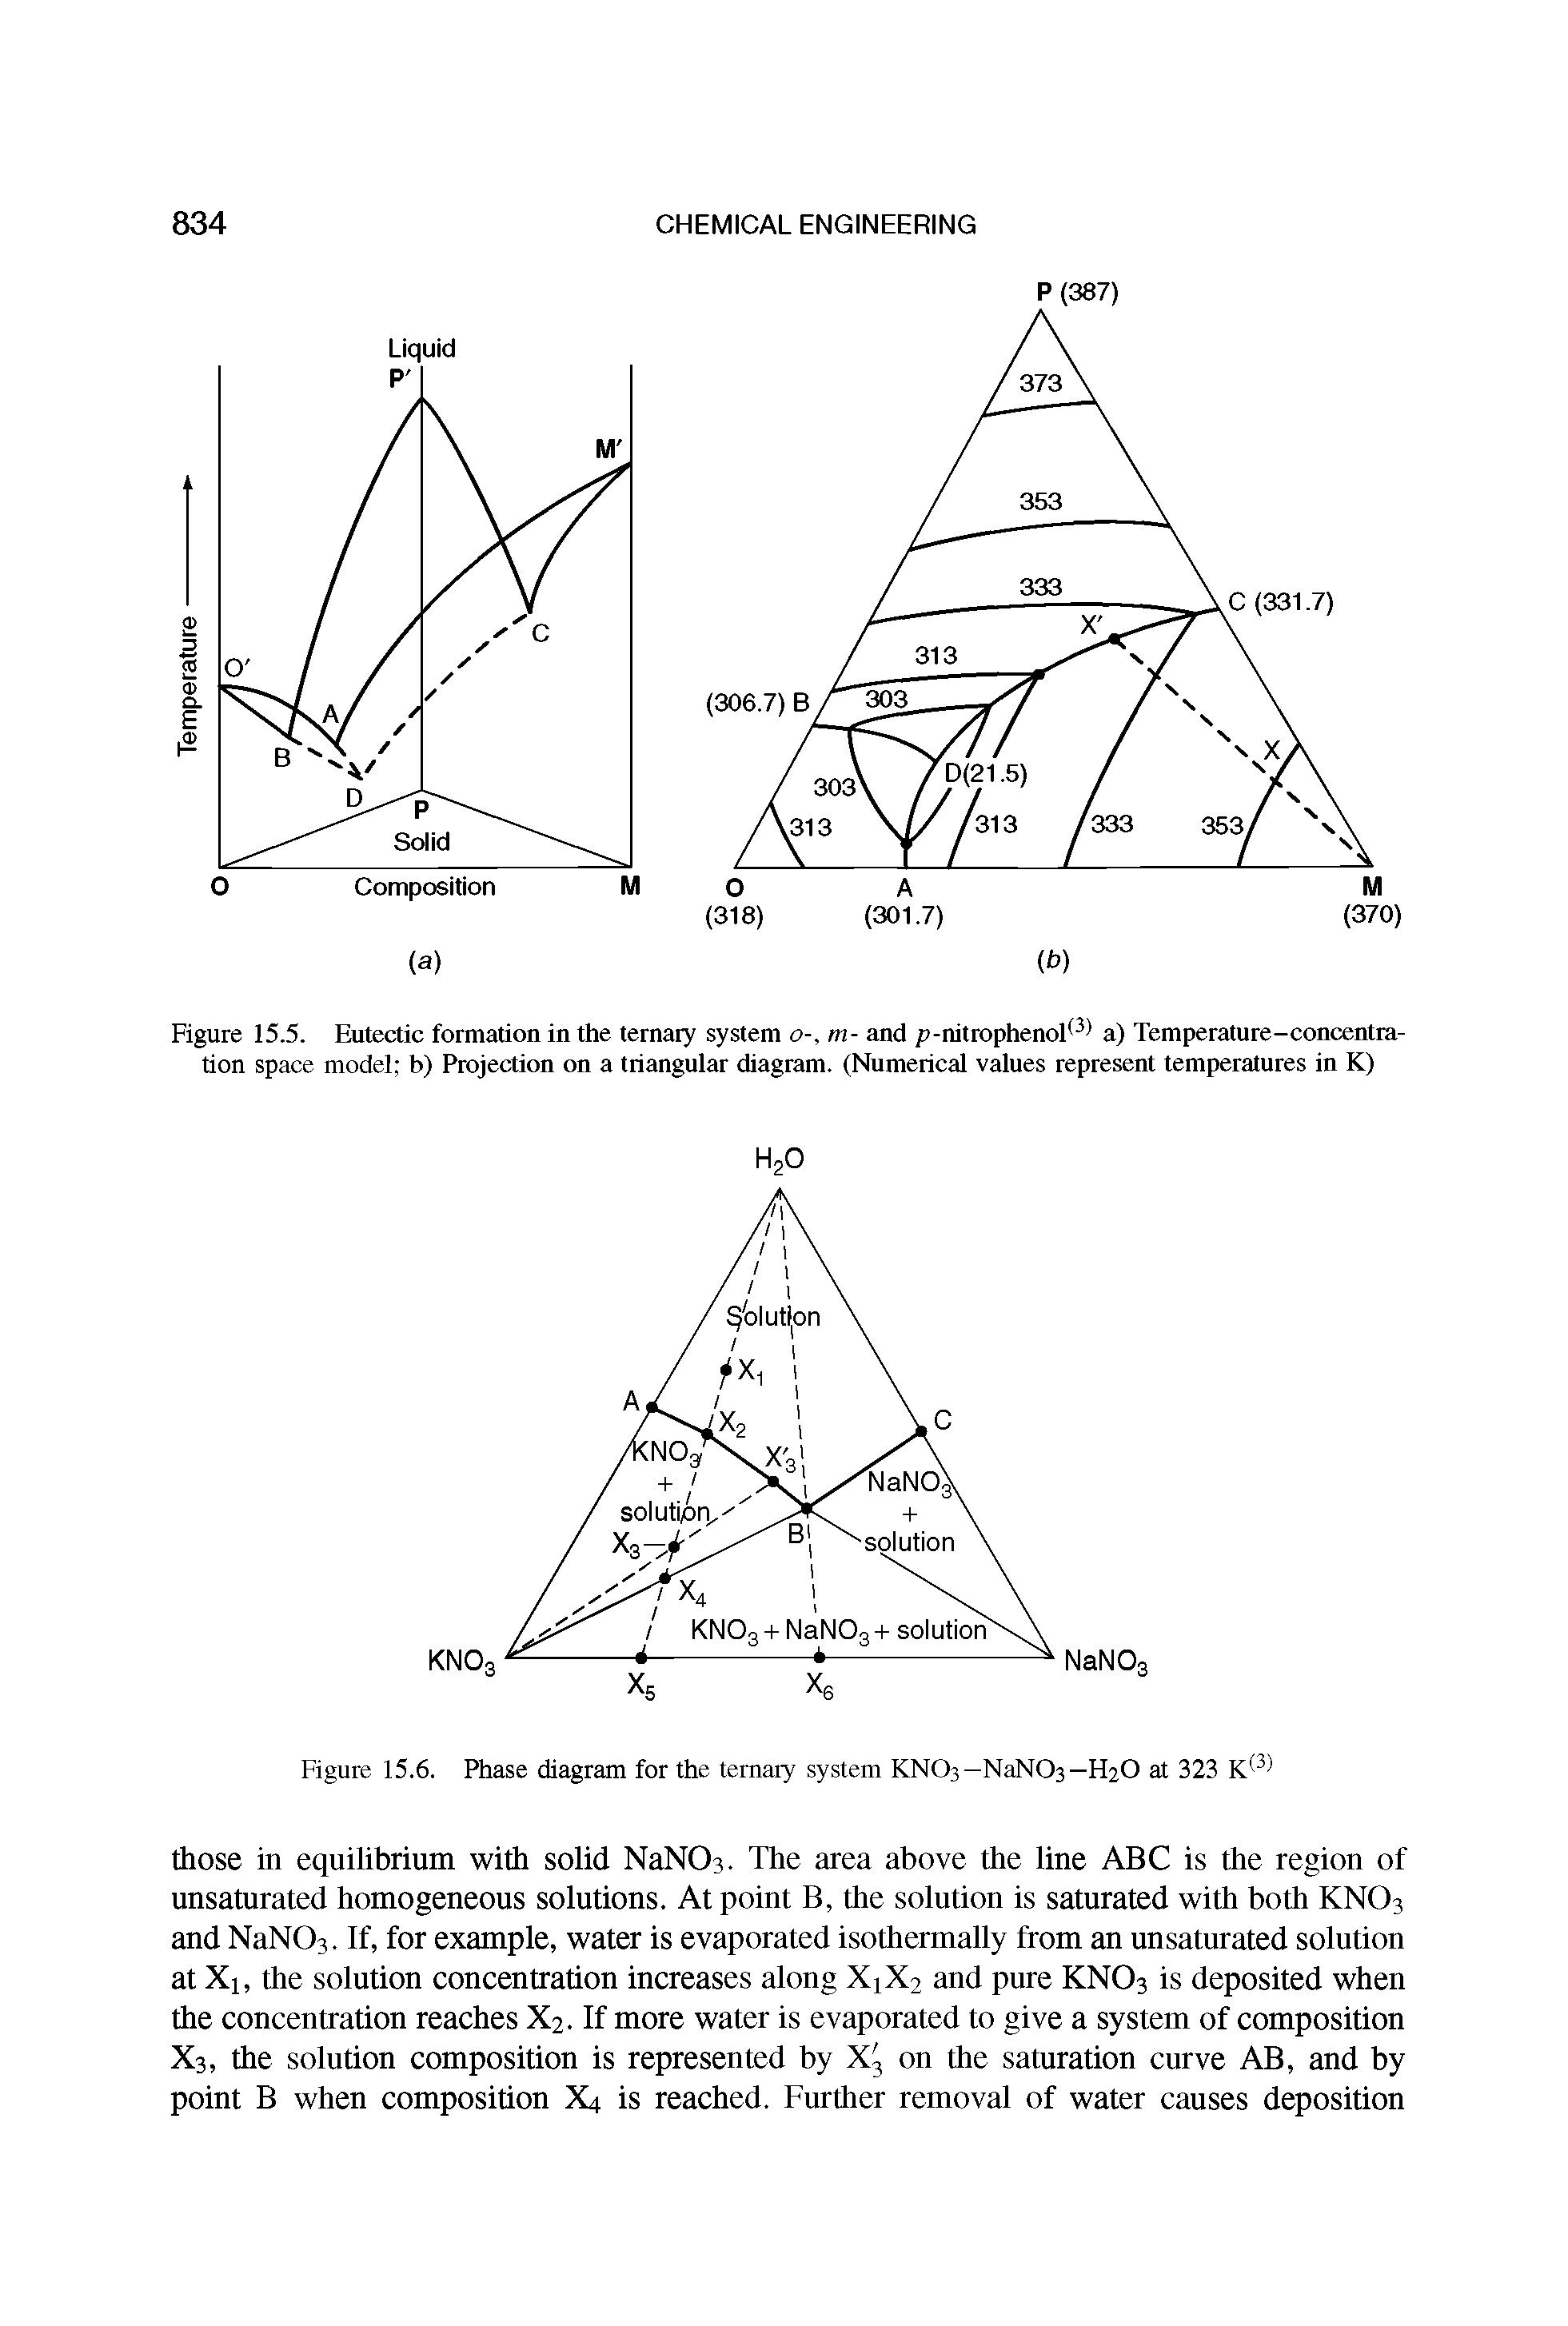 Figure 15.5. Eutectic formation in the ternary system o-, m- and p-mtrophenol 3 a) Temperature-concentration space model b) Projection on a triangular diagram. (Numerical values represent temperatures in K)...